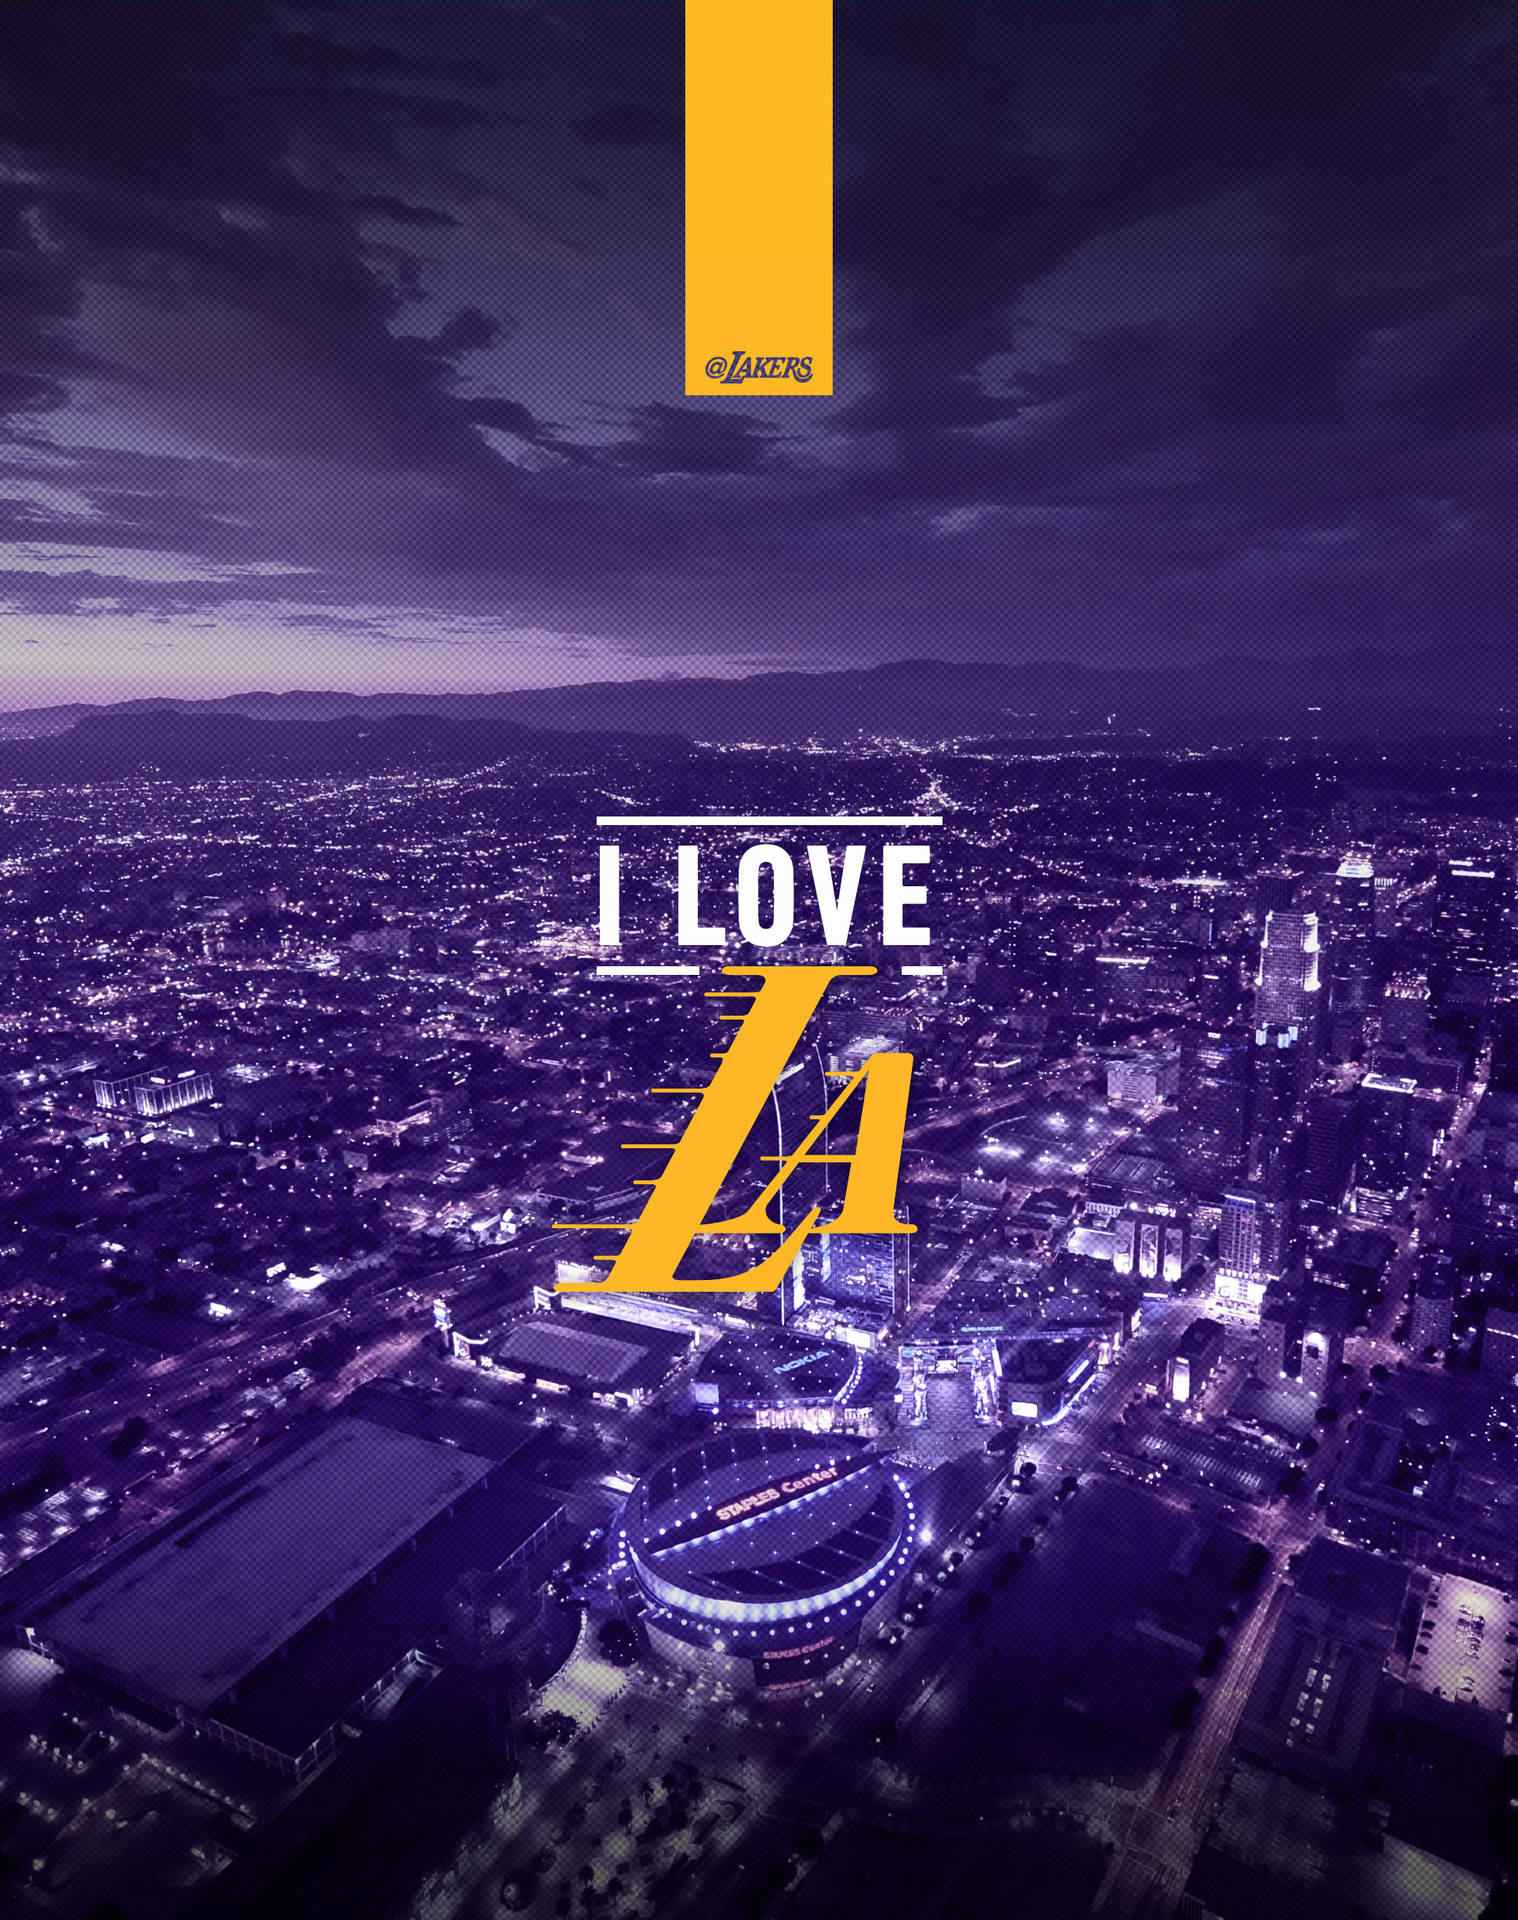 Show your Lakers pride with this stylish Lakers-branded iPhone Wallpaper